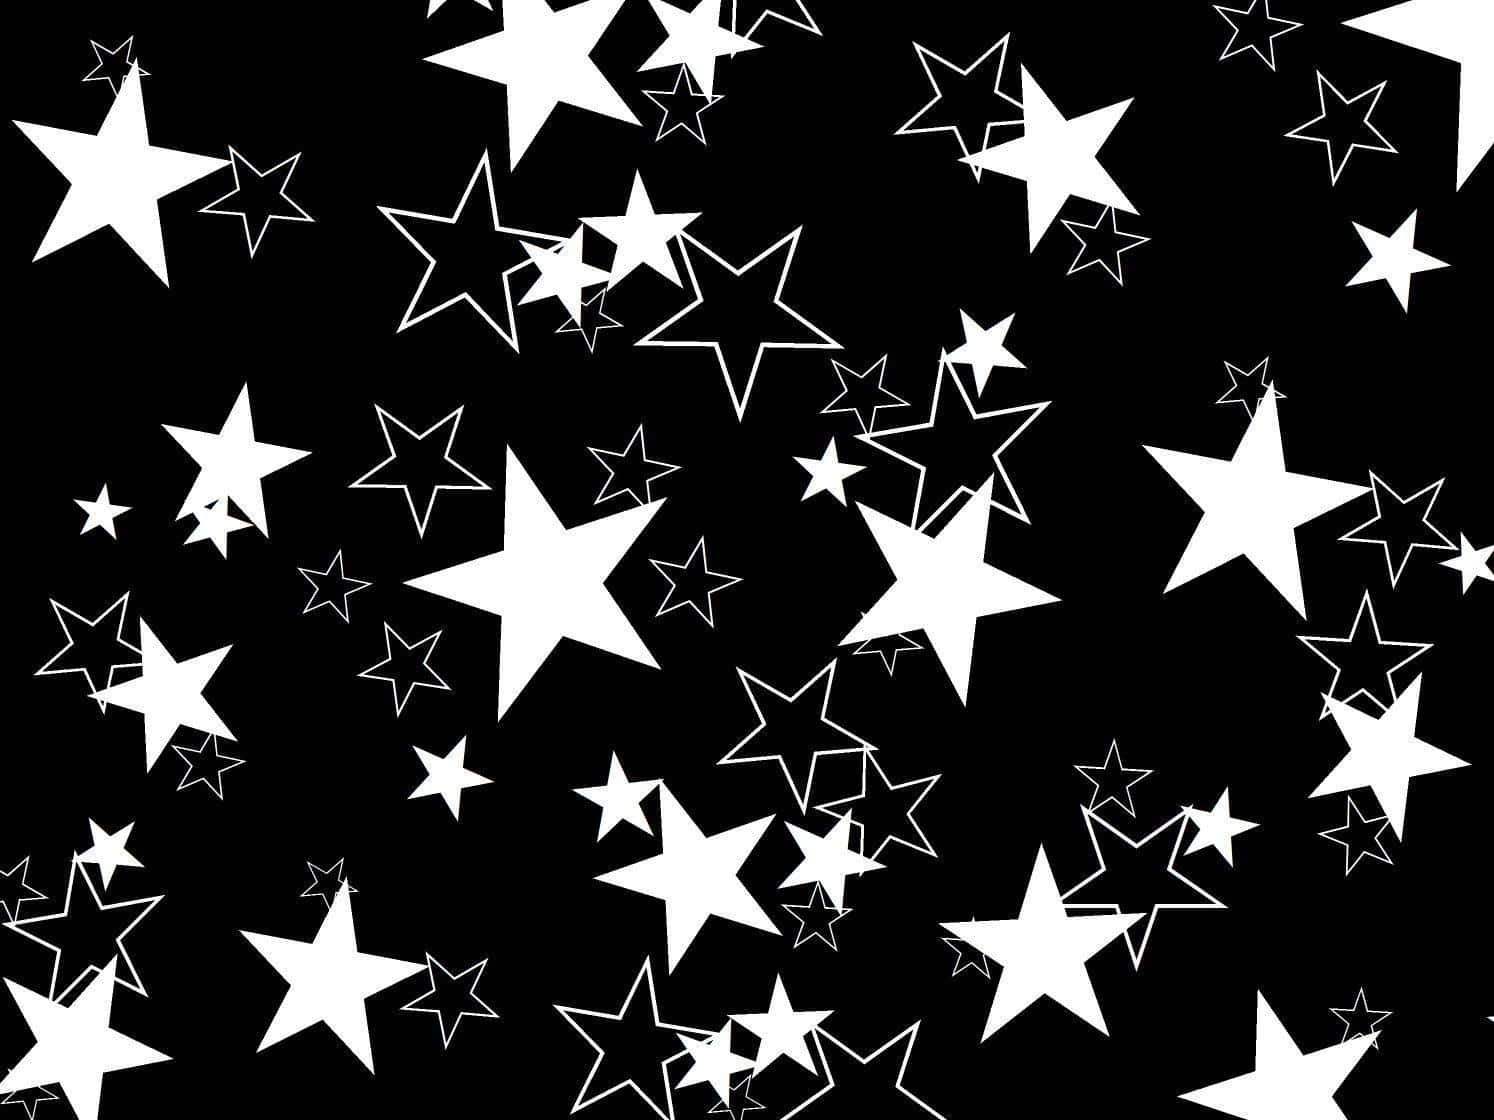 Exquisite Black and White Star Pattern Wallpaper